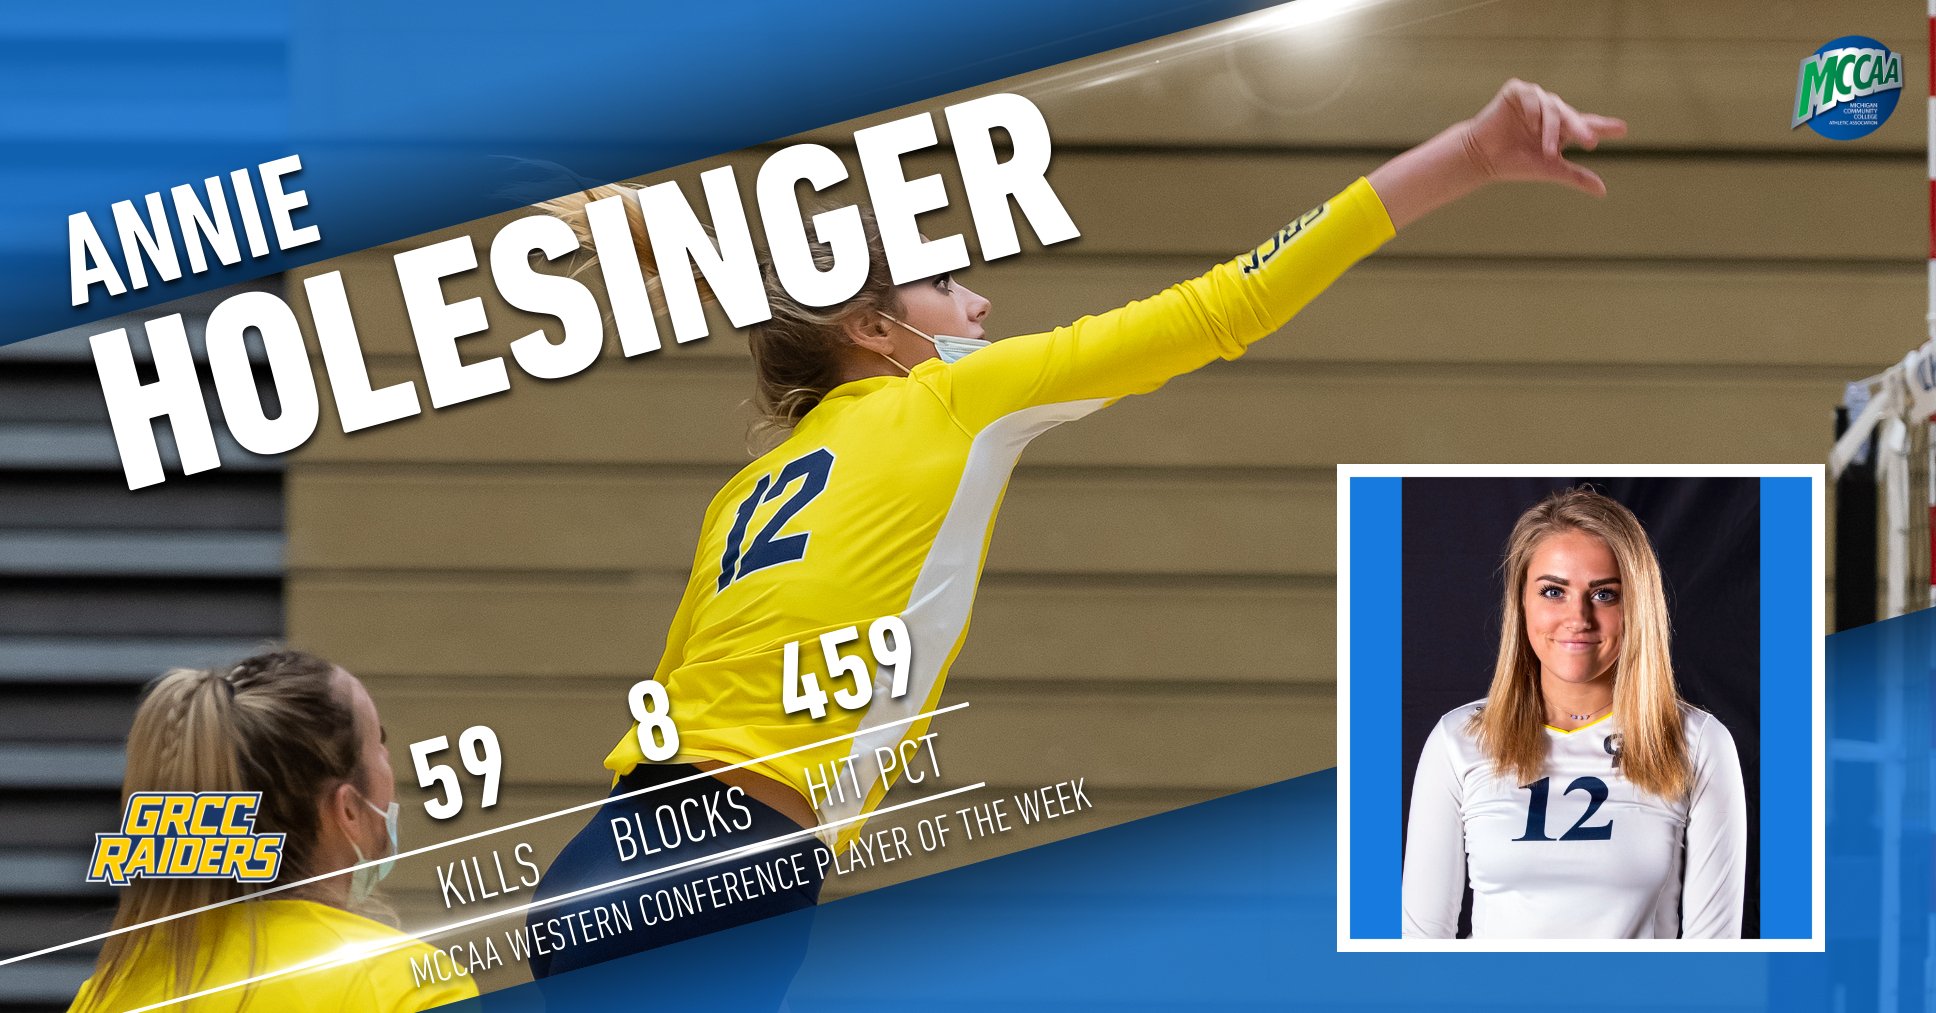 Annie Hoelsinger, MCCAA Western Conference Volleyball Player of the Week, Grand Rapids CC